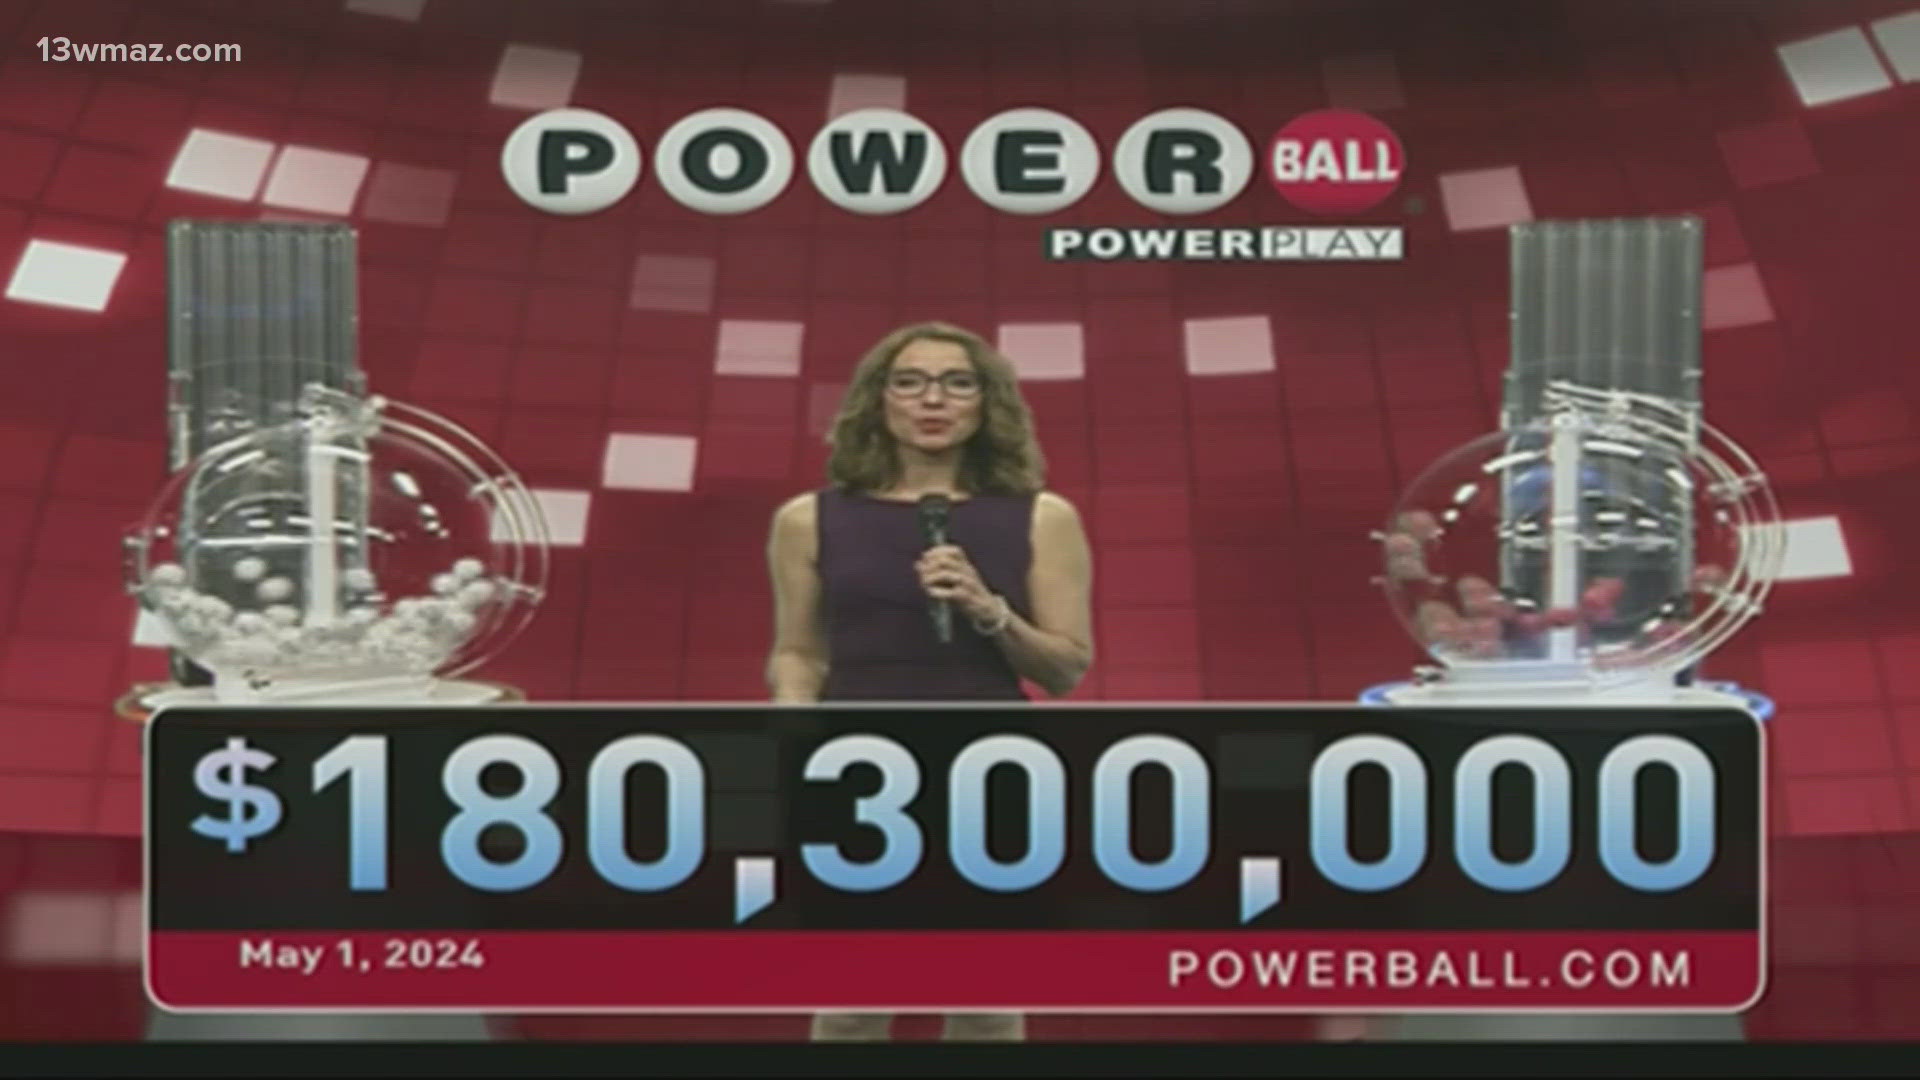 Here are your winning Powerball numbers for May 1, 2024's $180.3 million jackpot. What would you do with that kind of money?